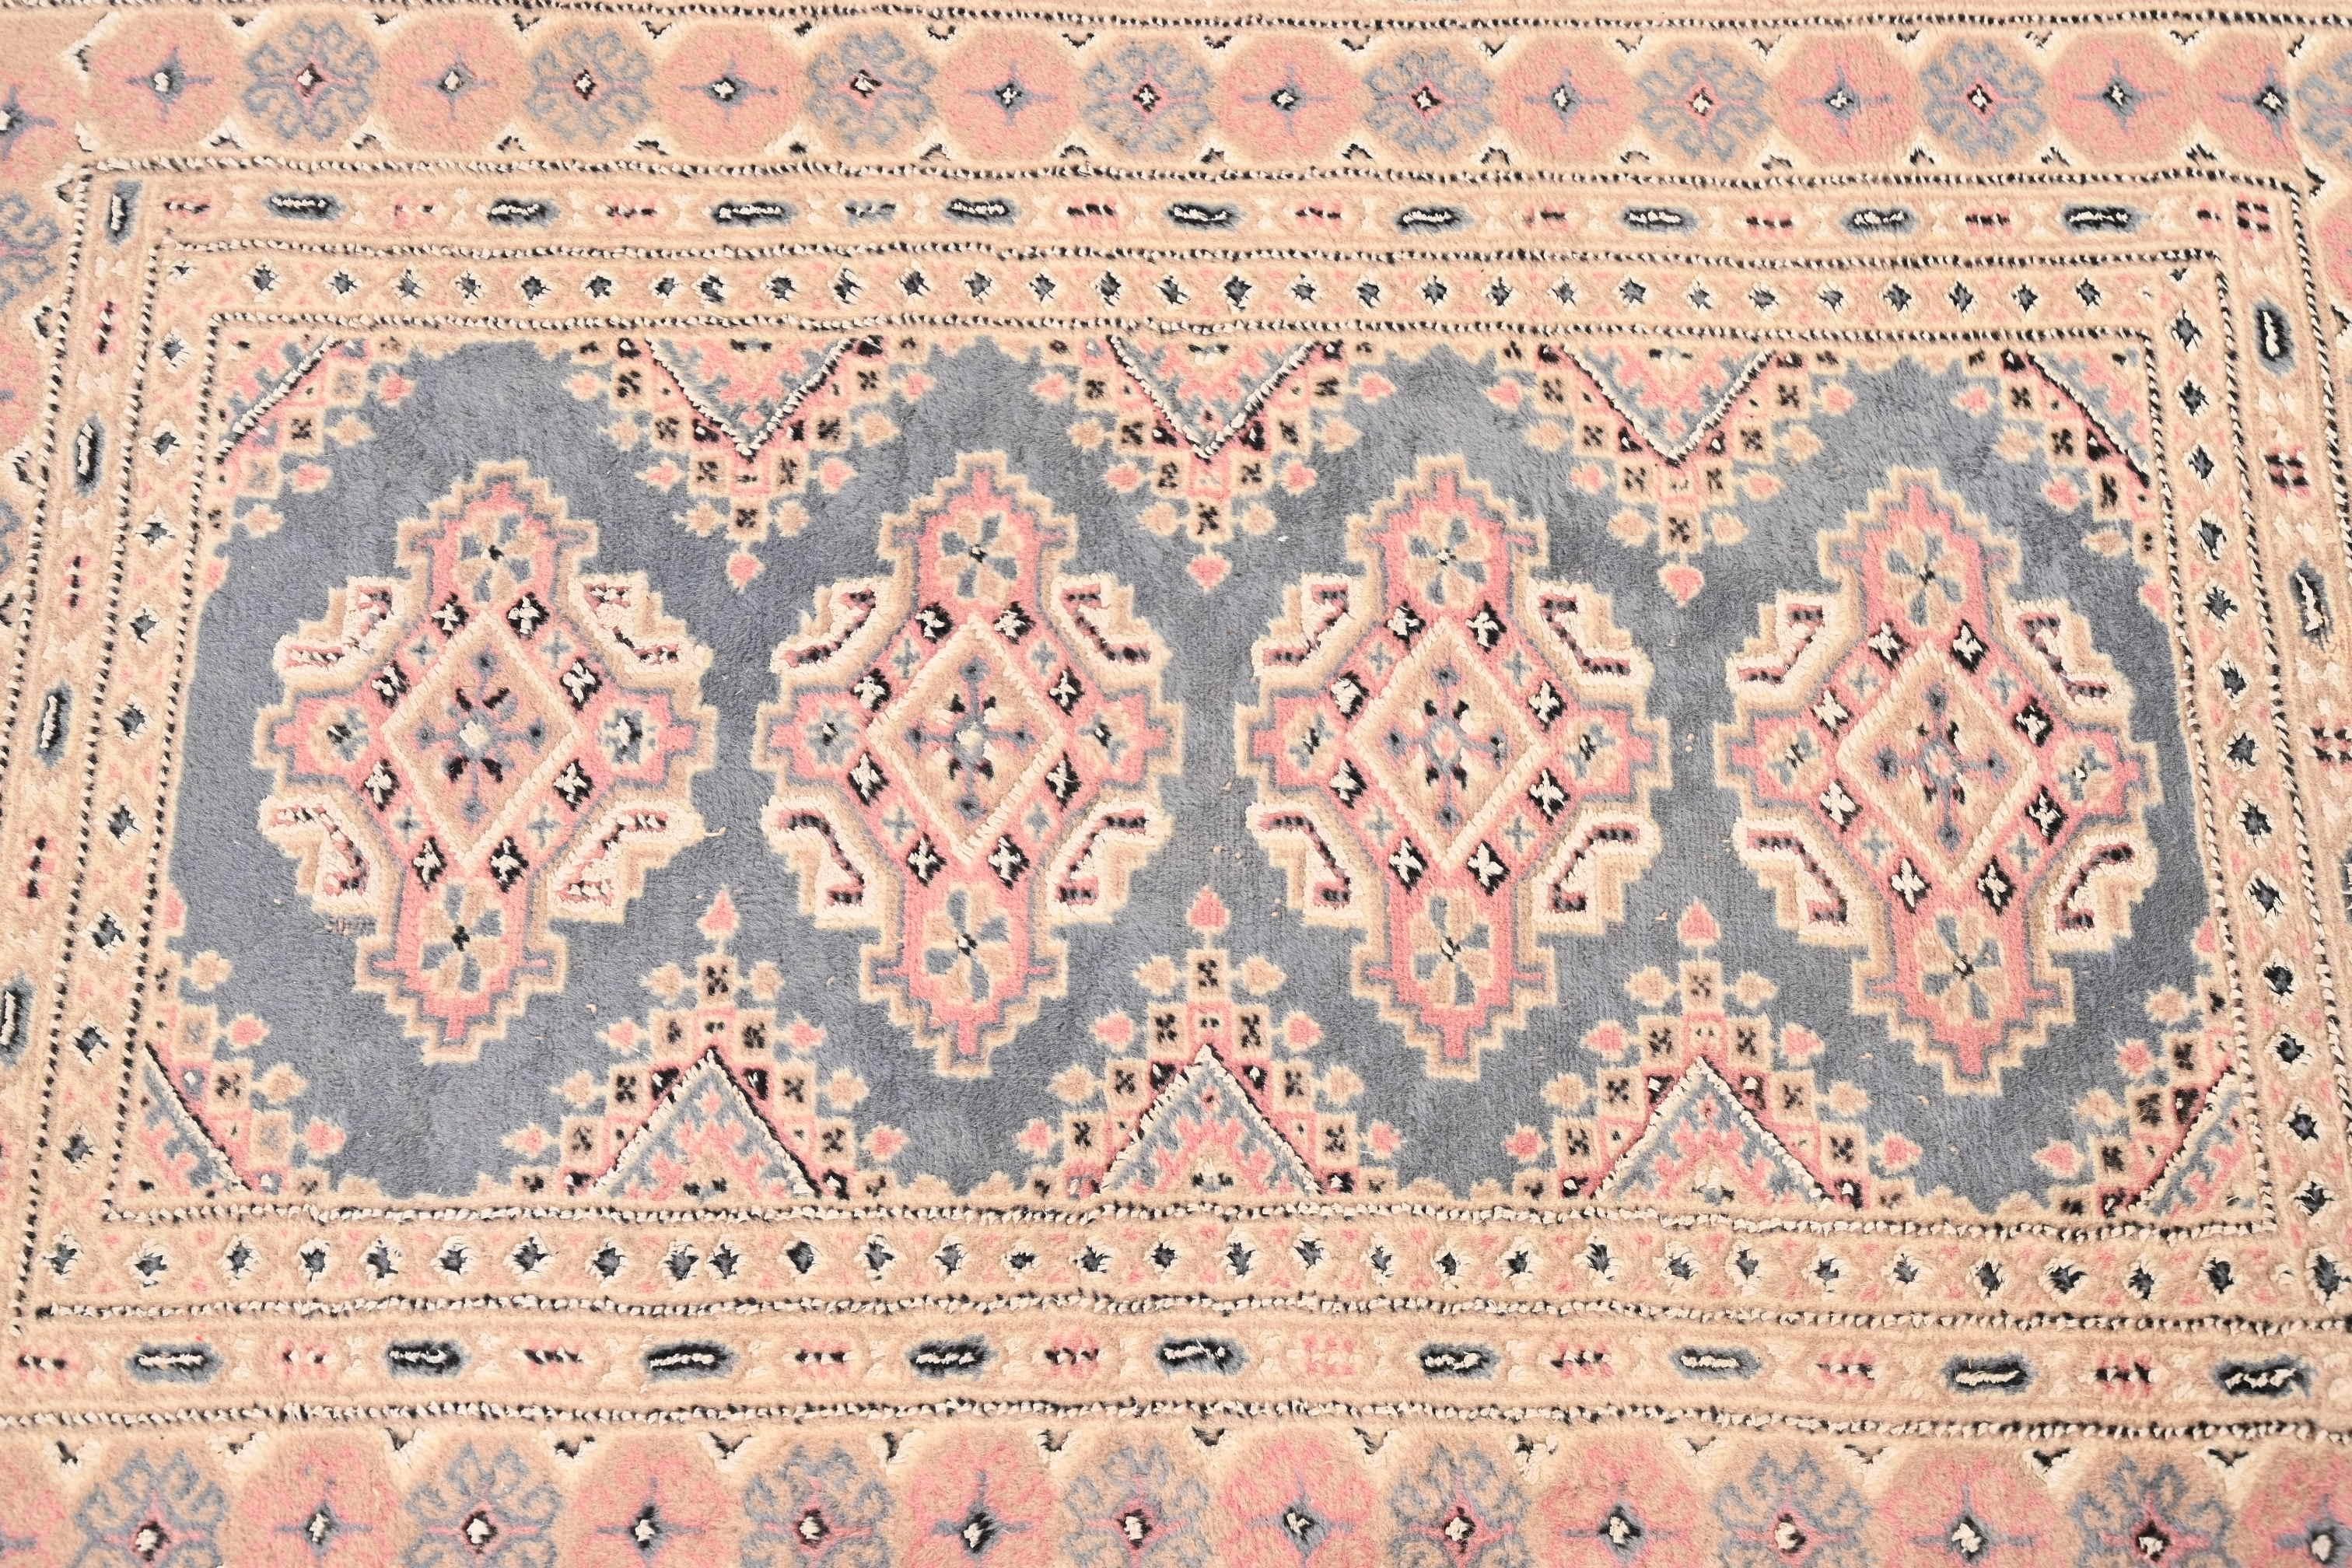 Vintage Hand-Woven Persian Bokhara Wool Rug in Light Blue, Pink, and Cream 3